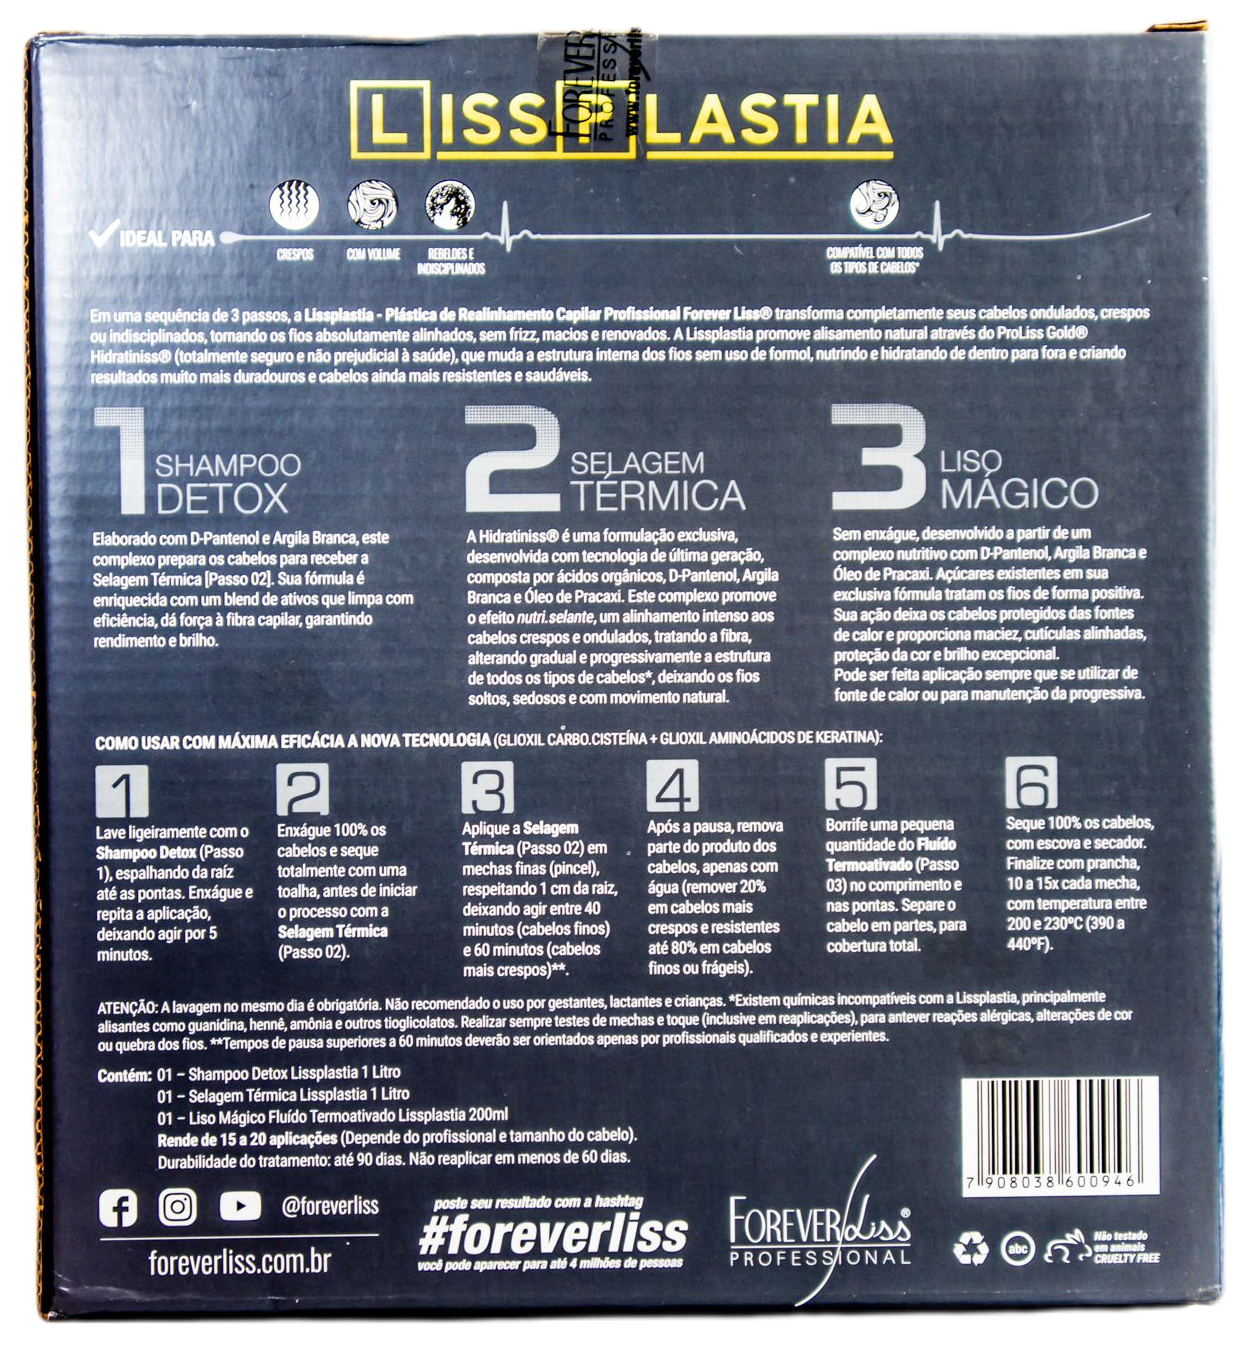 Forever Liss Brazilian Keratin Treatment Lissplastia Capillary Realignment Hair Treatment 3 Products - Forever Liss